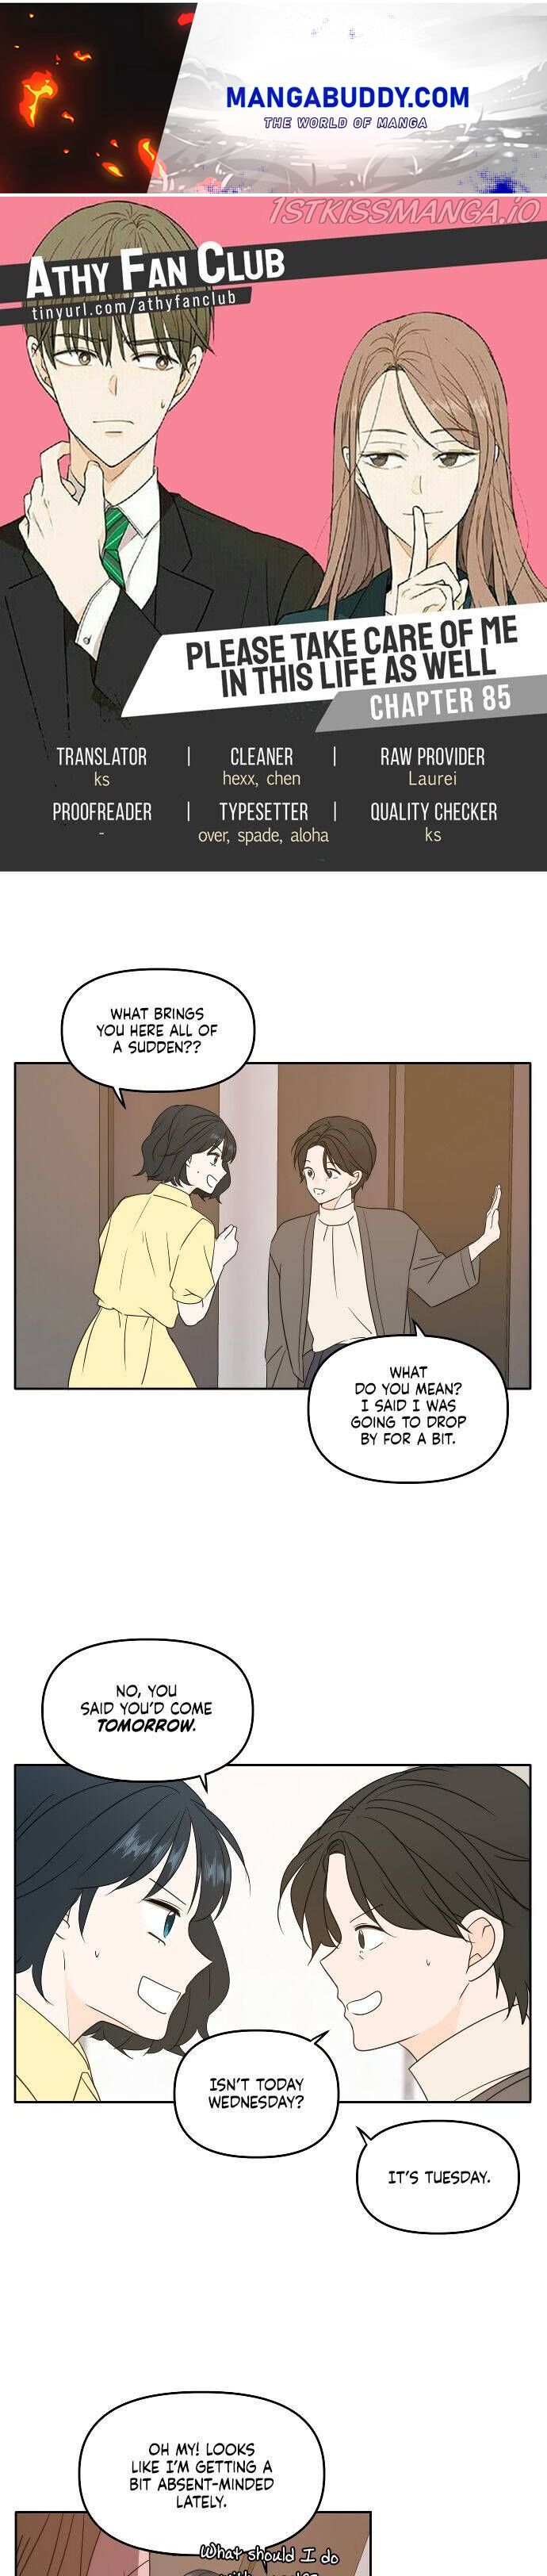 Please Take Care Of Me In This Life As Well chapter 85 - page 1